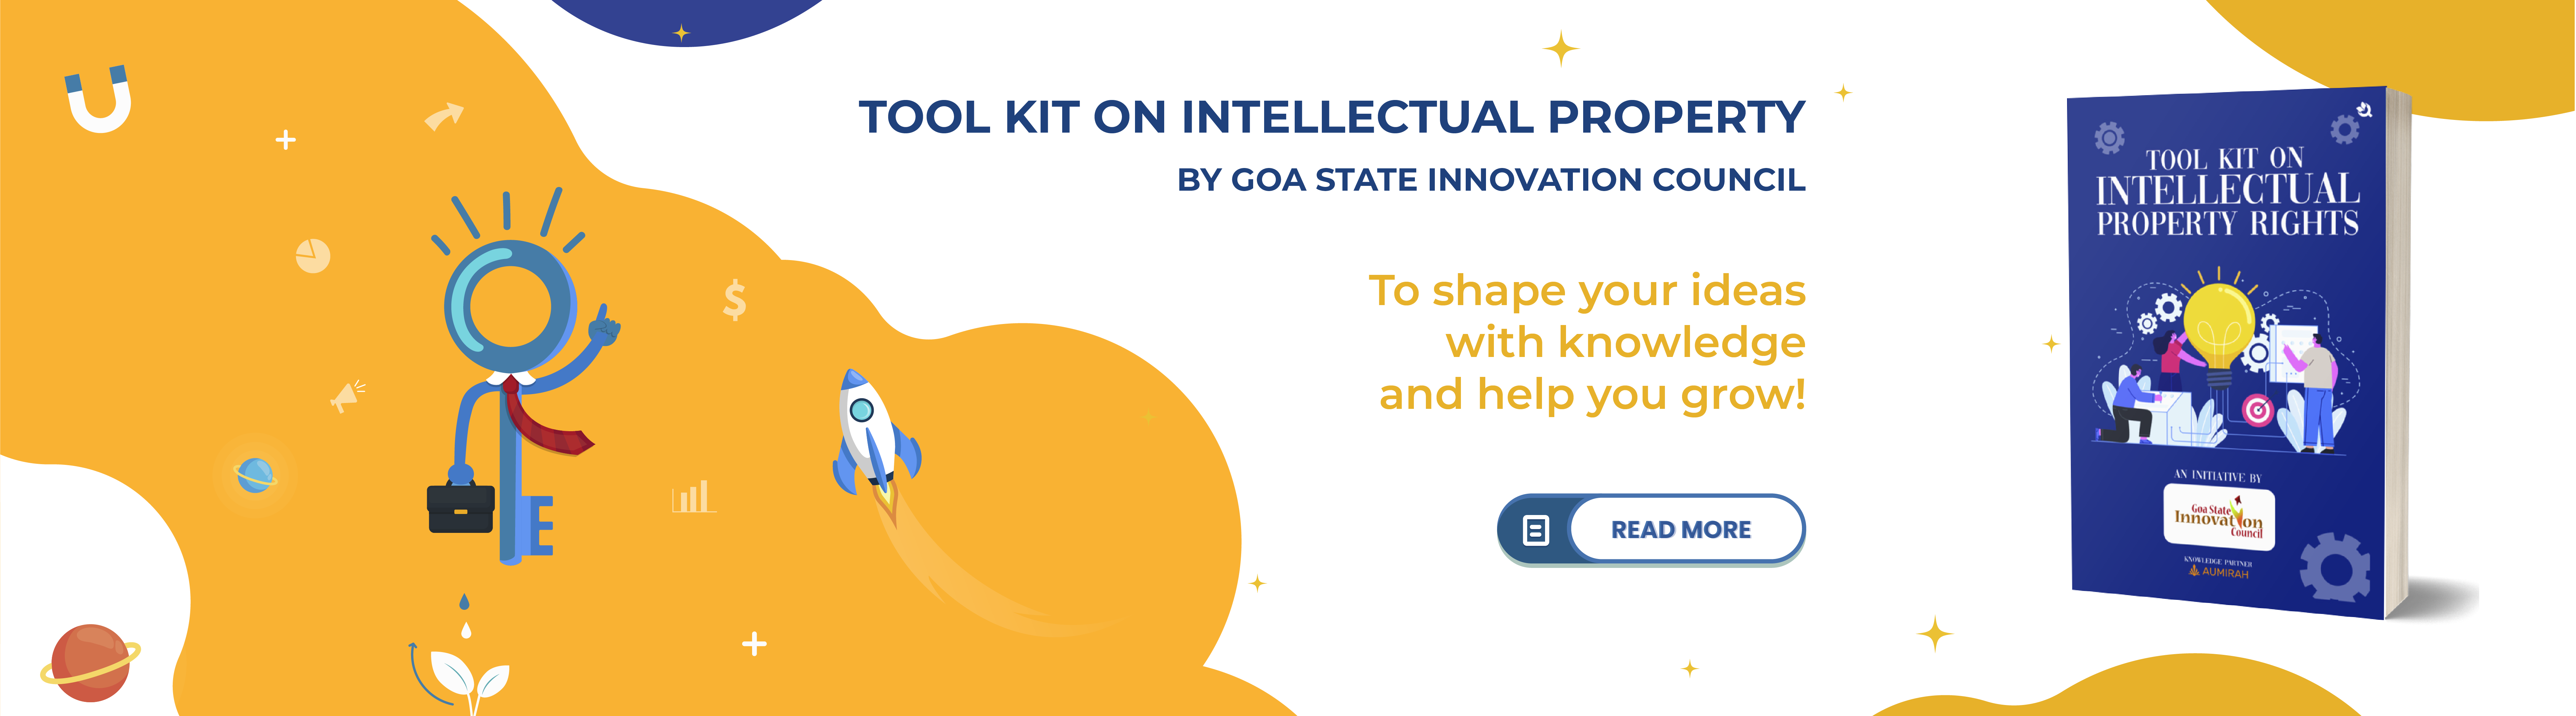 Tool Kit On Intellectual Property Rights